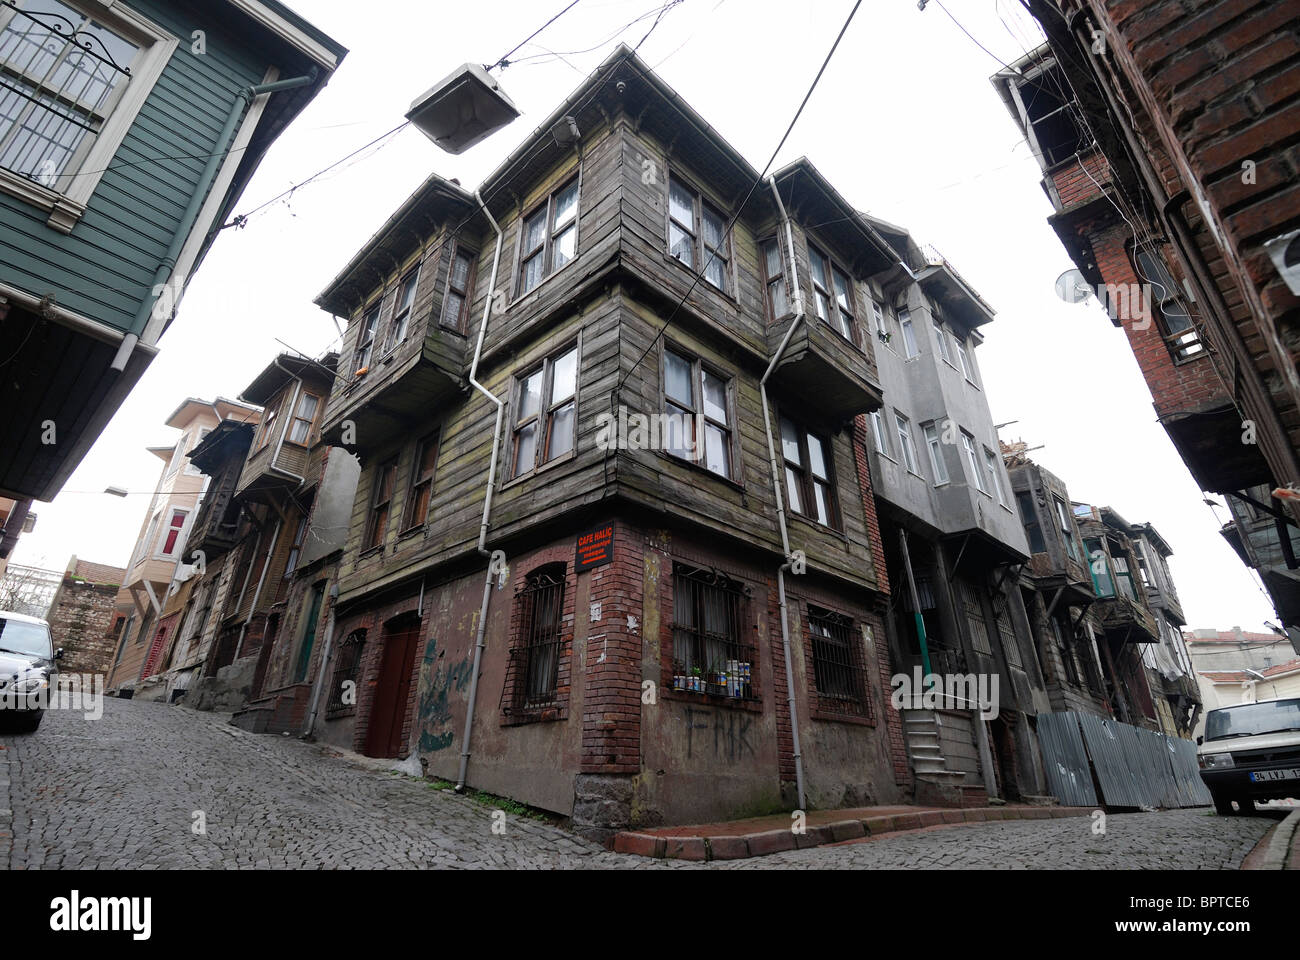 Istanbul. Turkey. Dilapidated Ottoman era wooden buildings in the Suleymaniye district. Stock Photo